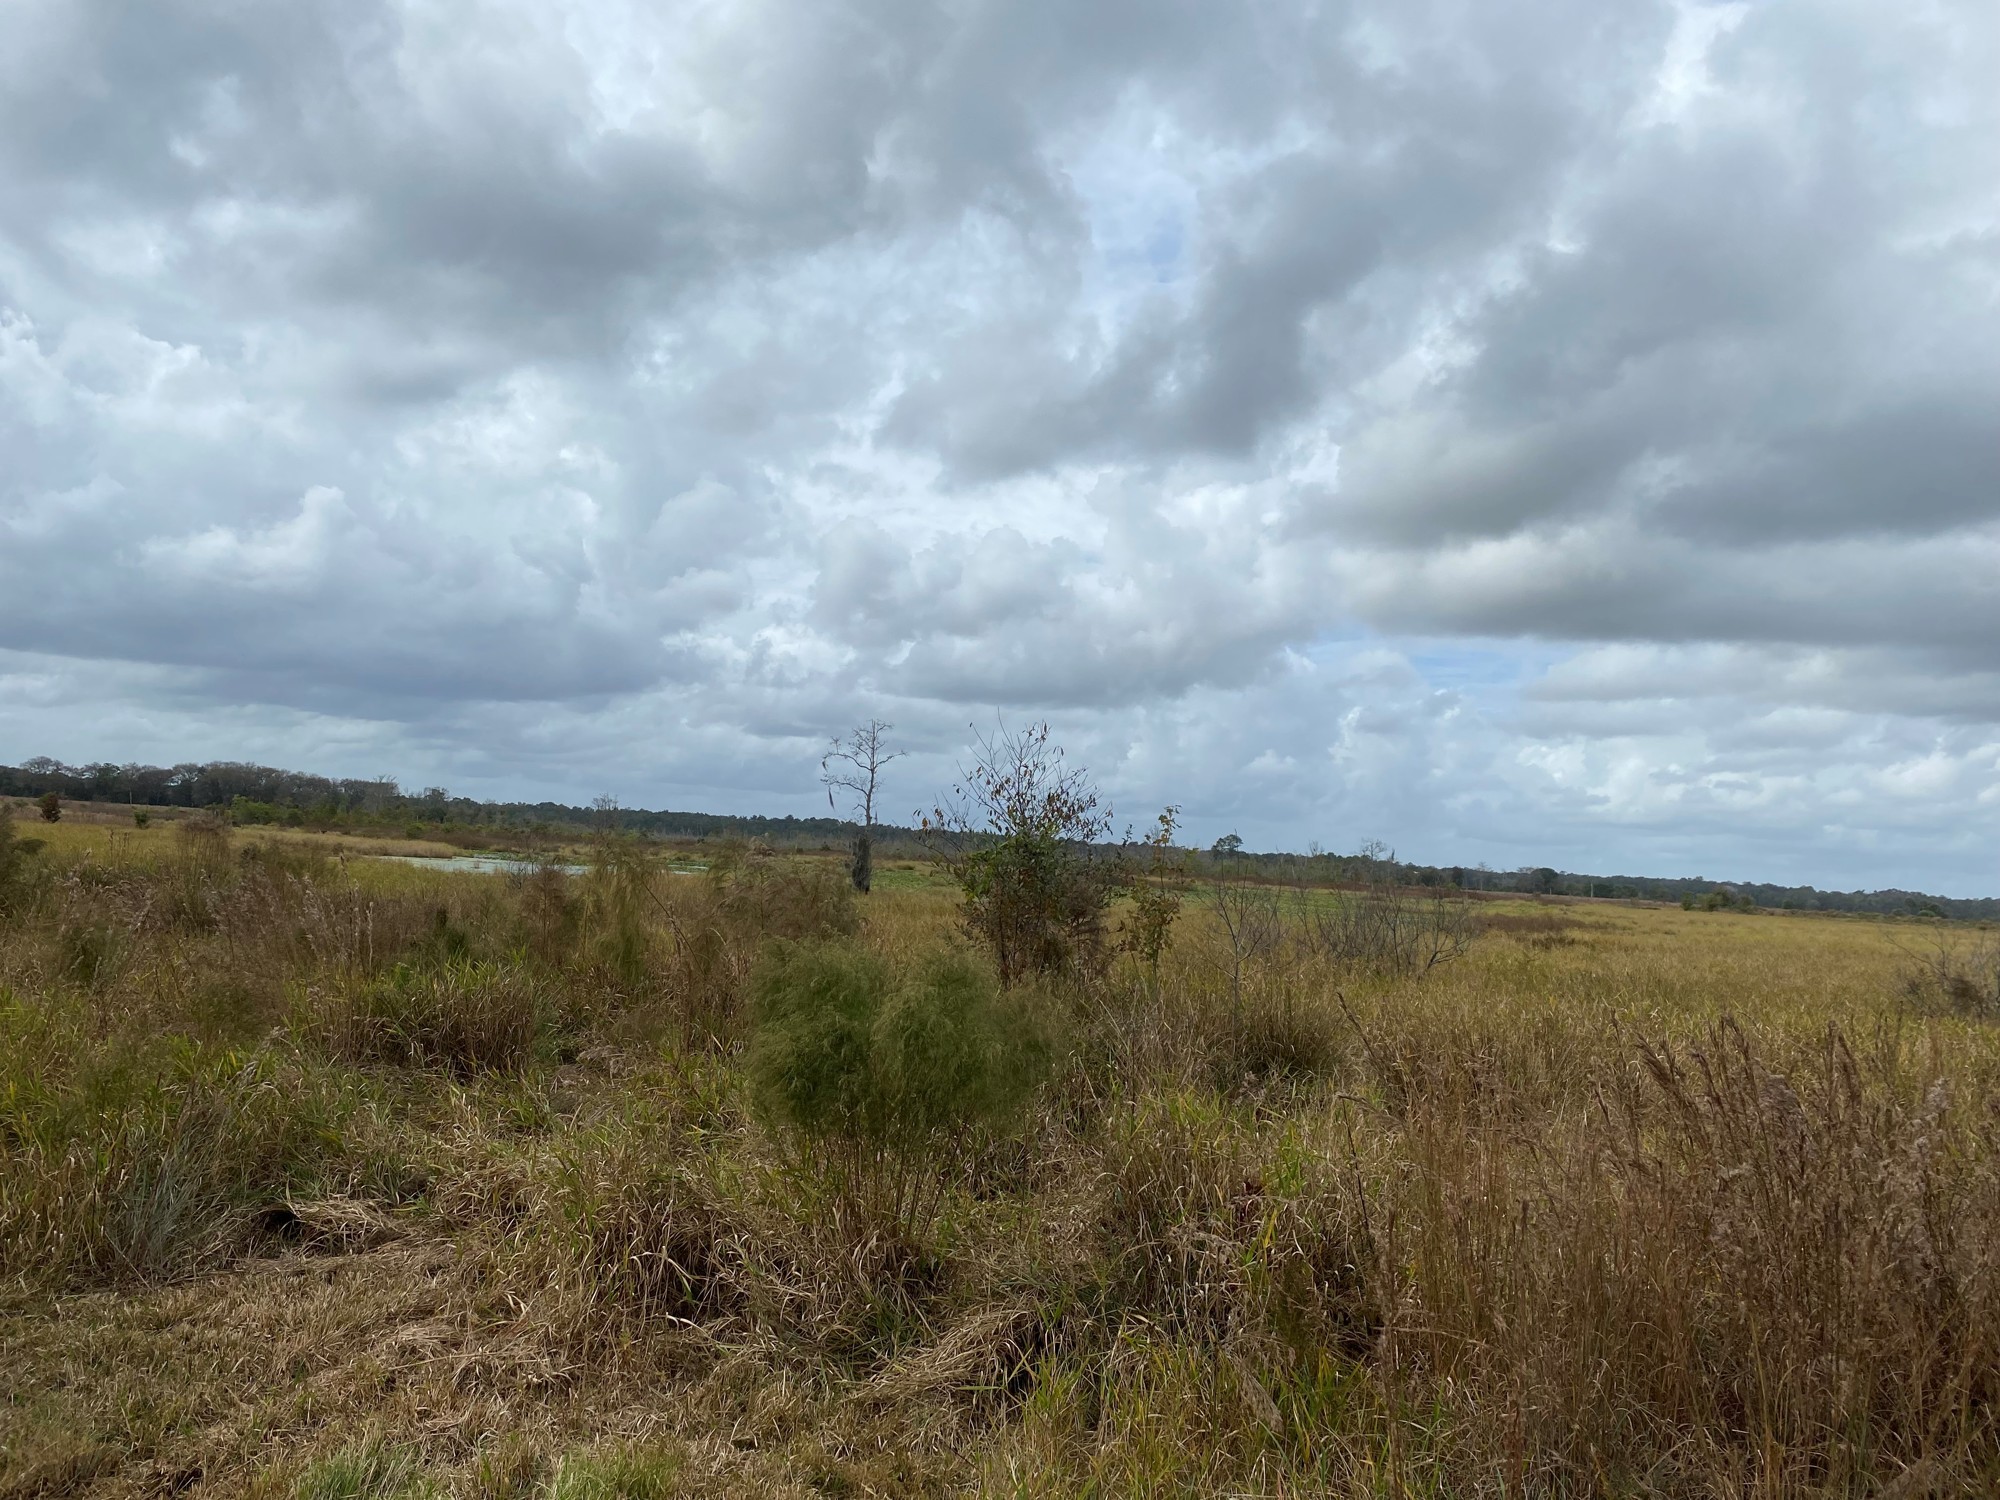 The site is about 2½ miles north of Interlachen along County Road 315.